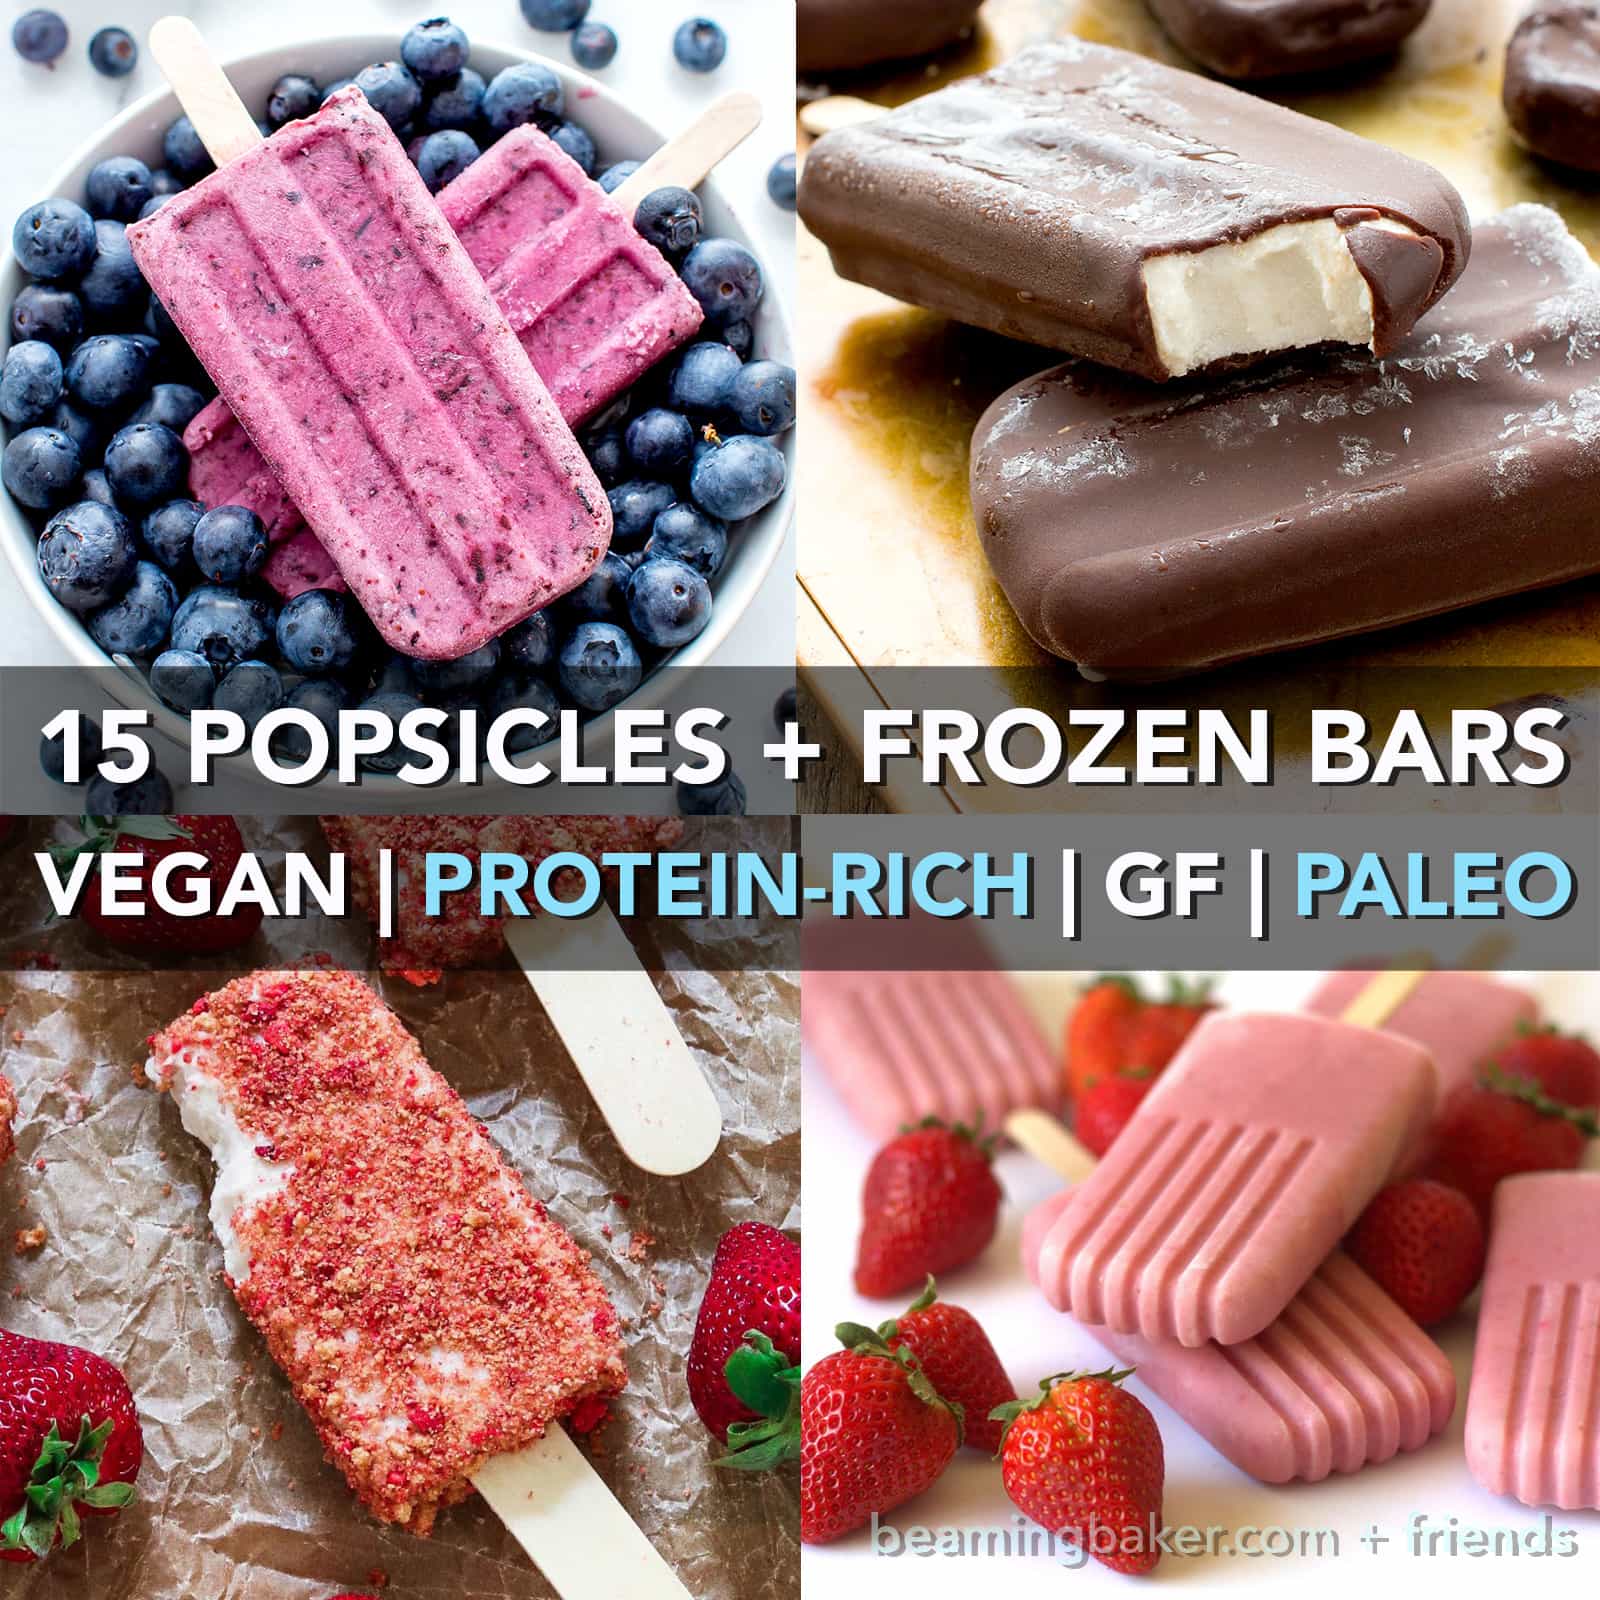 15 Healthy Frozen Desserts Made in a Popsicle Mold (Paleo, Vegan, Dairy-Free, Gluten-Free)